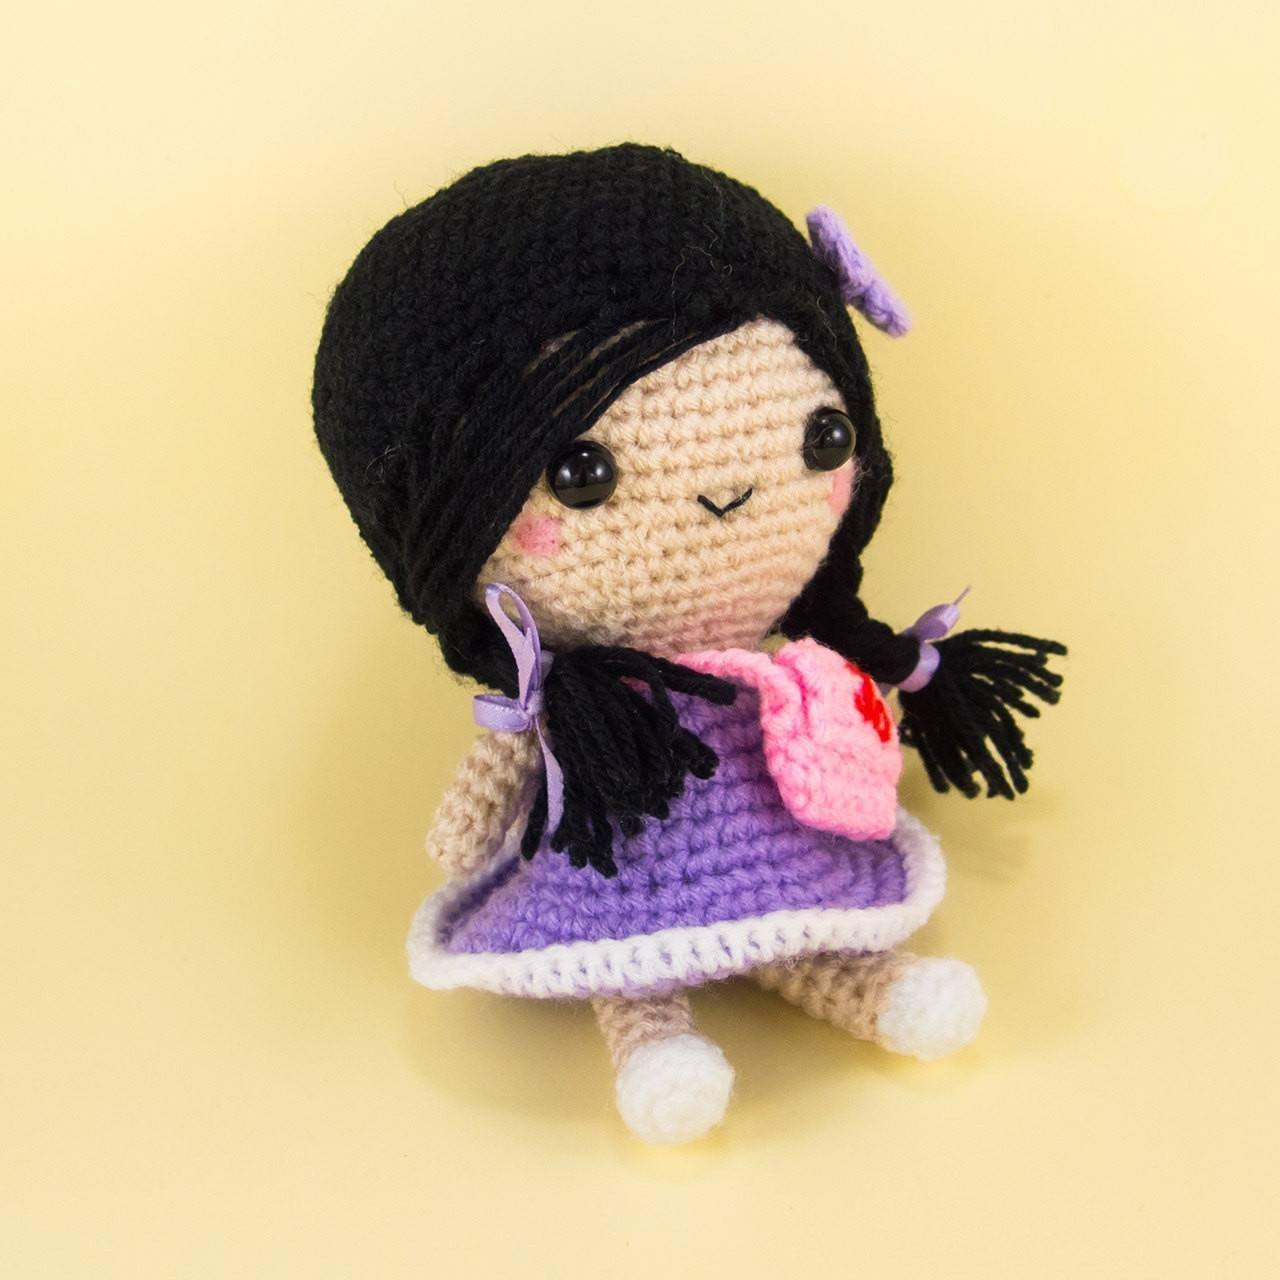 Crochet Doll with Bag Side View